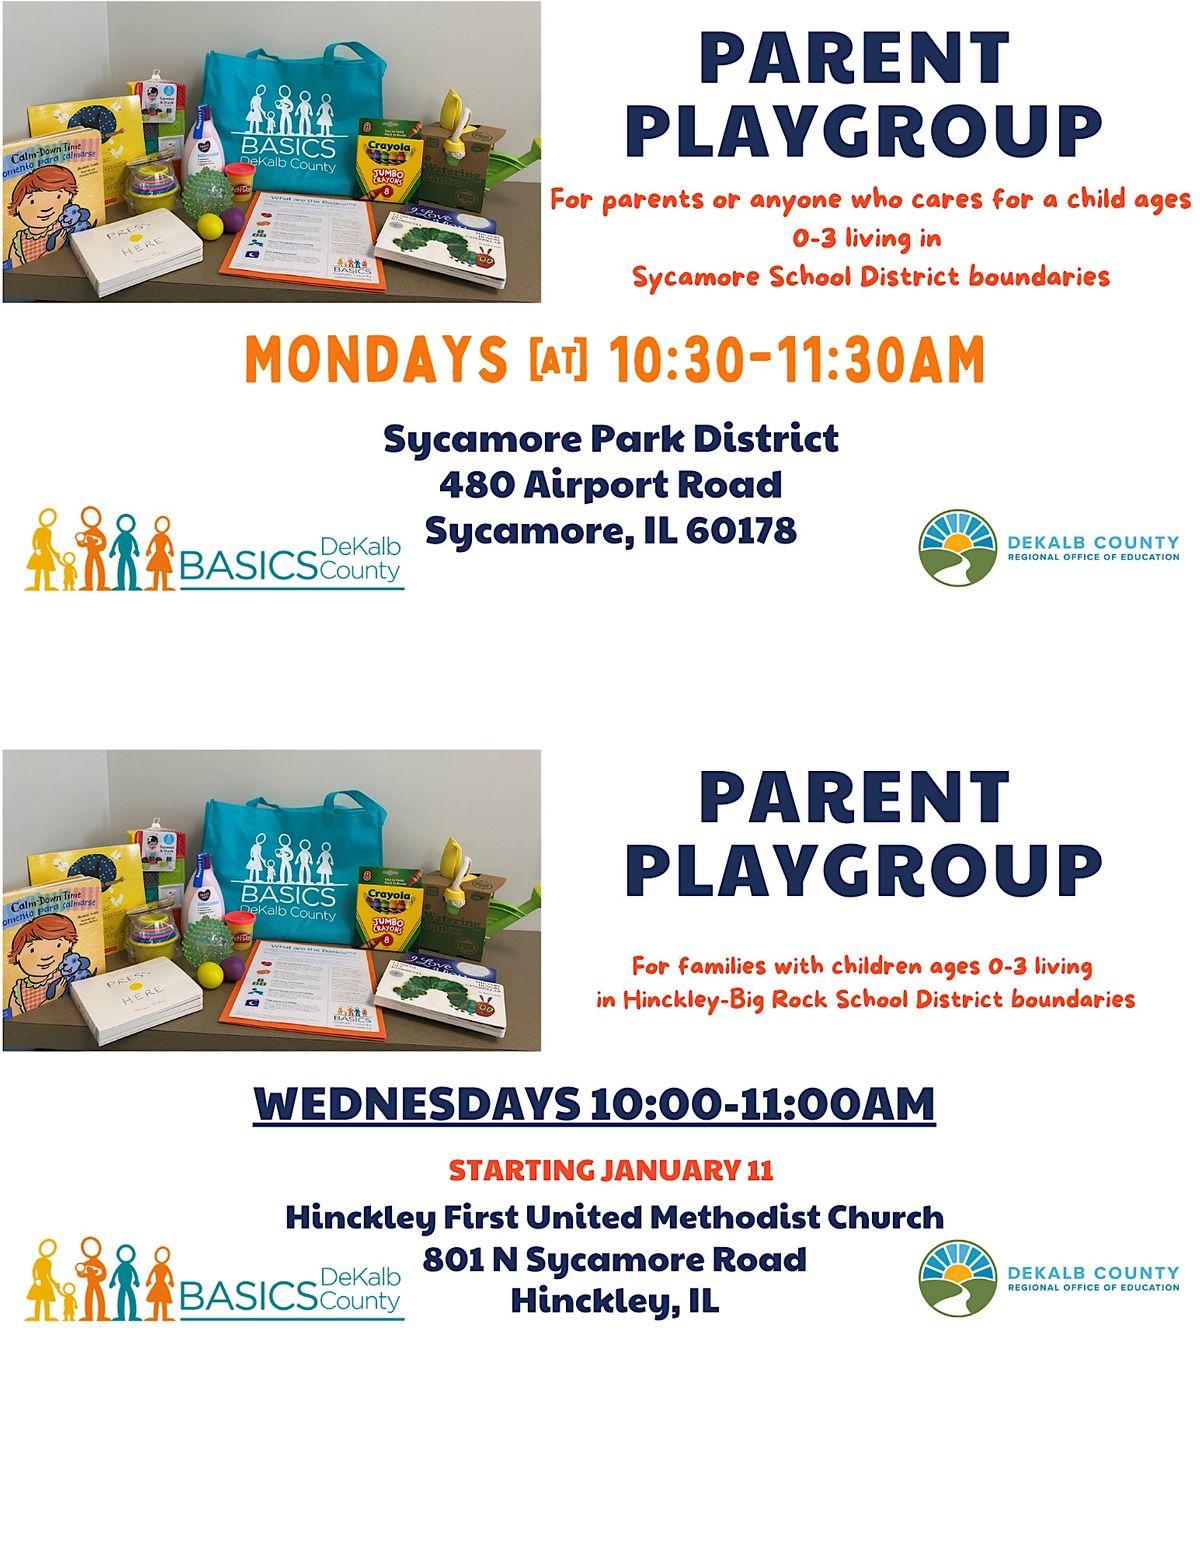 Monday Parent Playgroup Sycamore